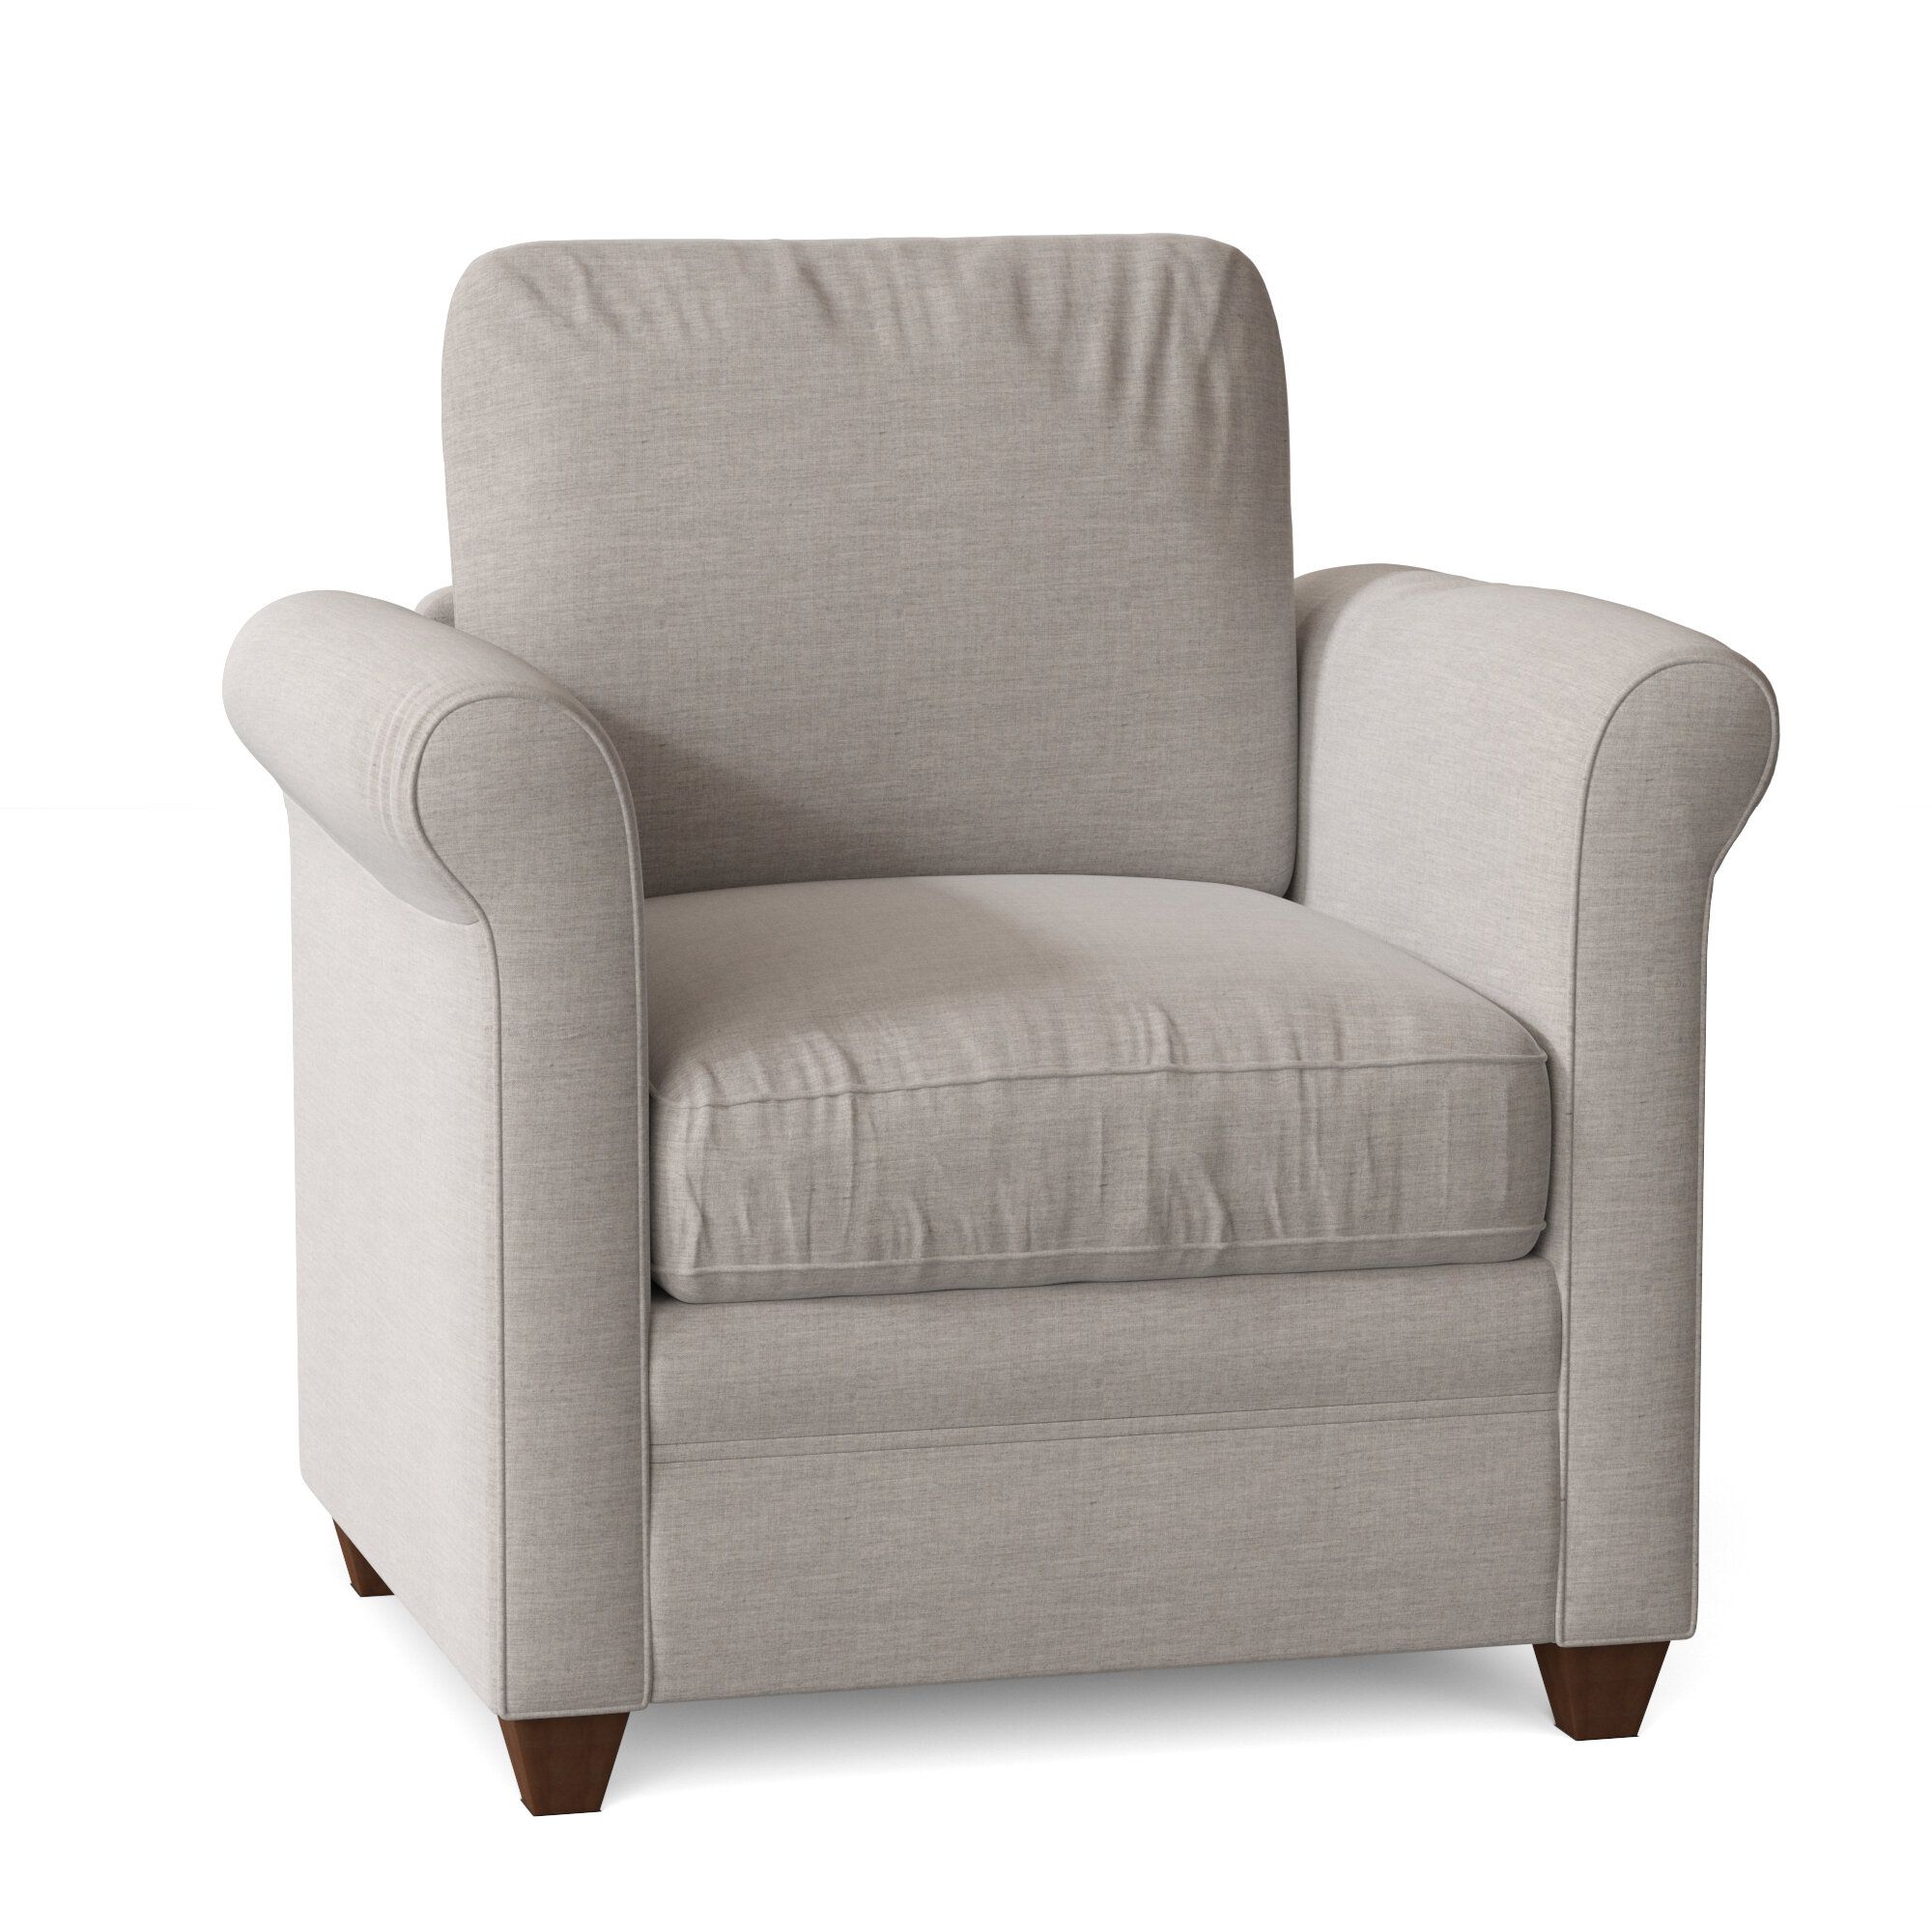 Silver Birch Lane™ Accent Chairs You'Ll Love In 2021 | Wayfair In Young Armchairs By Birch Lane (View 8 of 15)